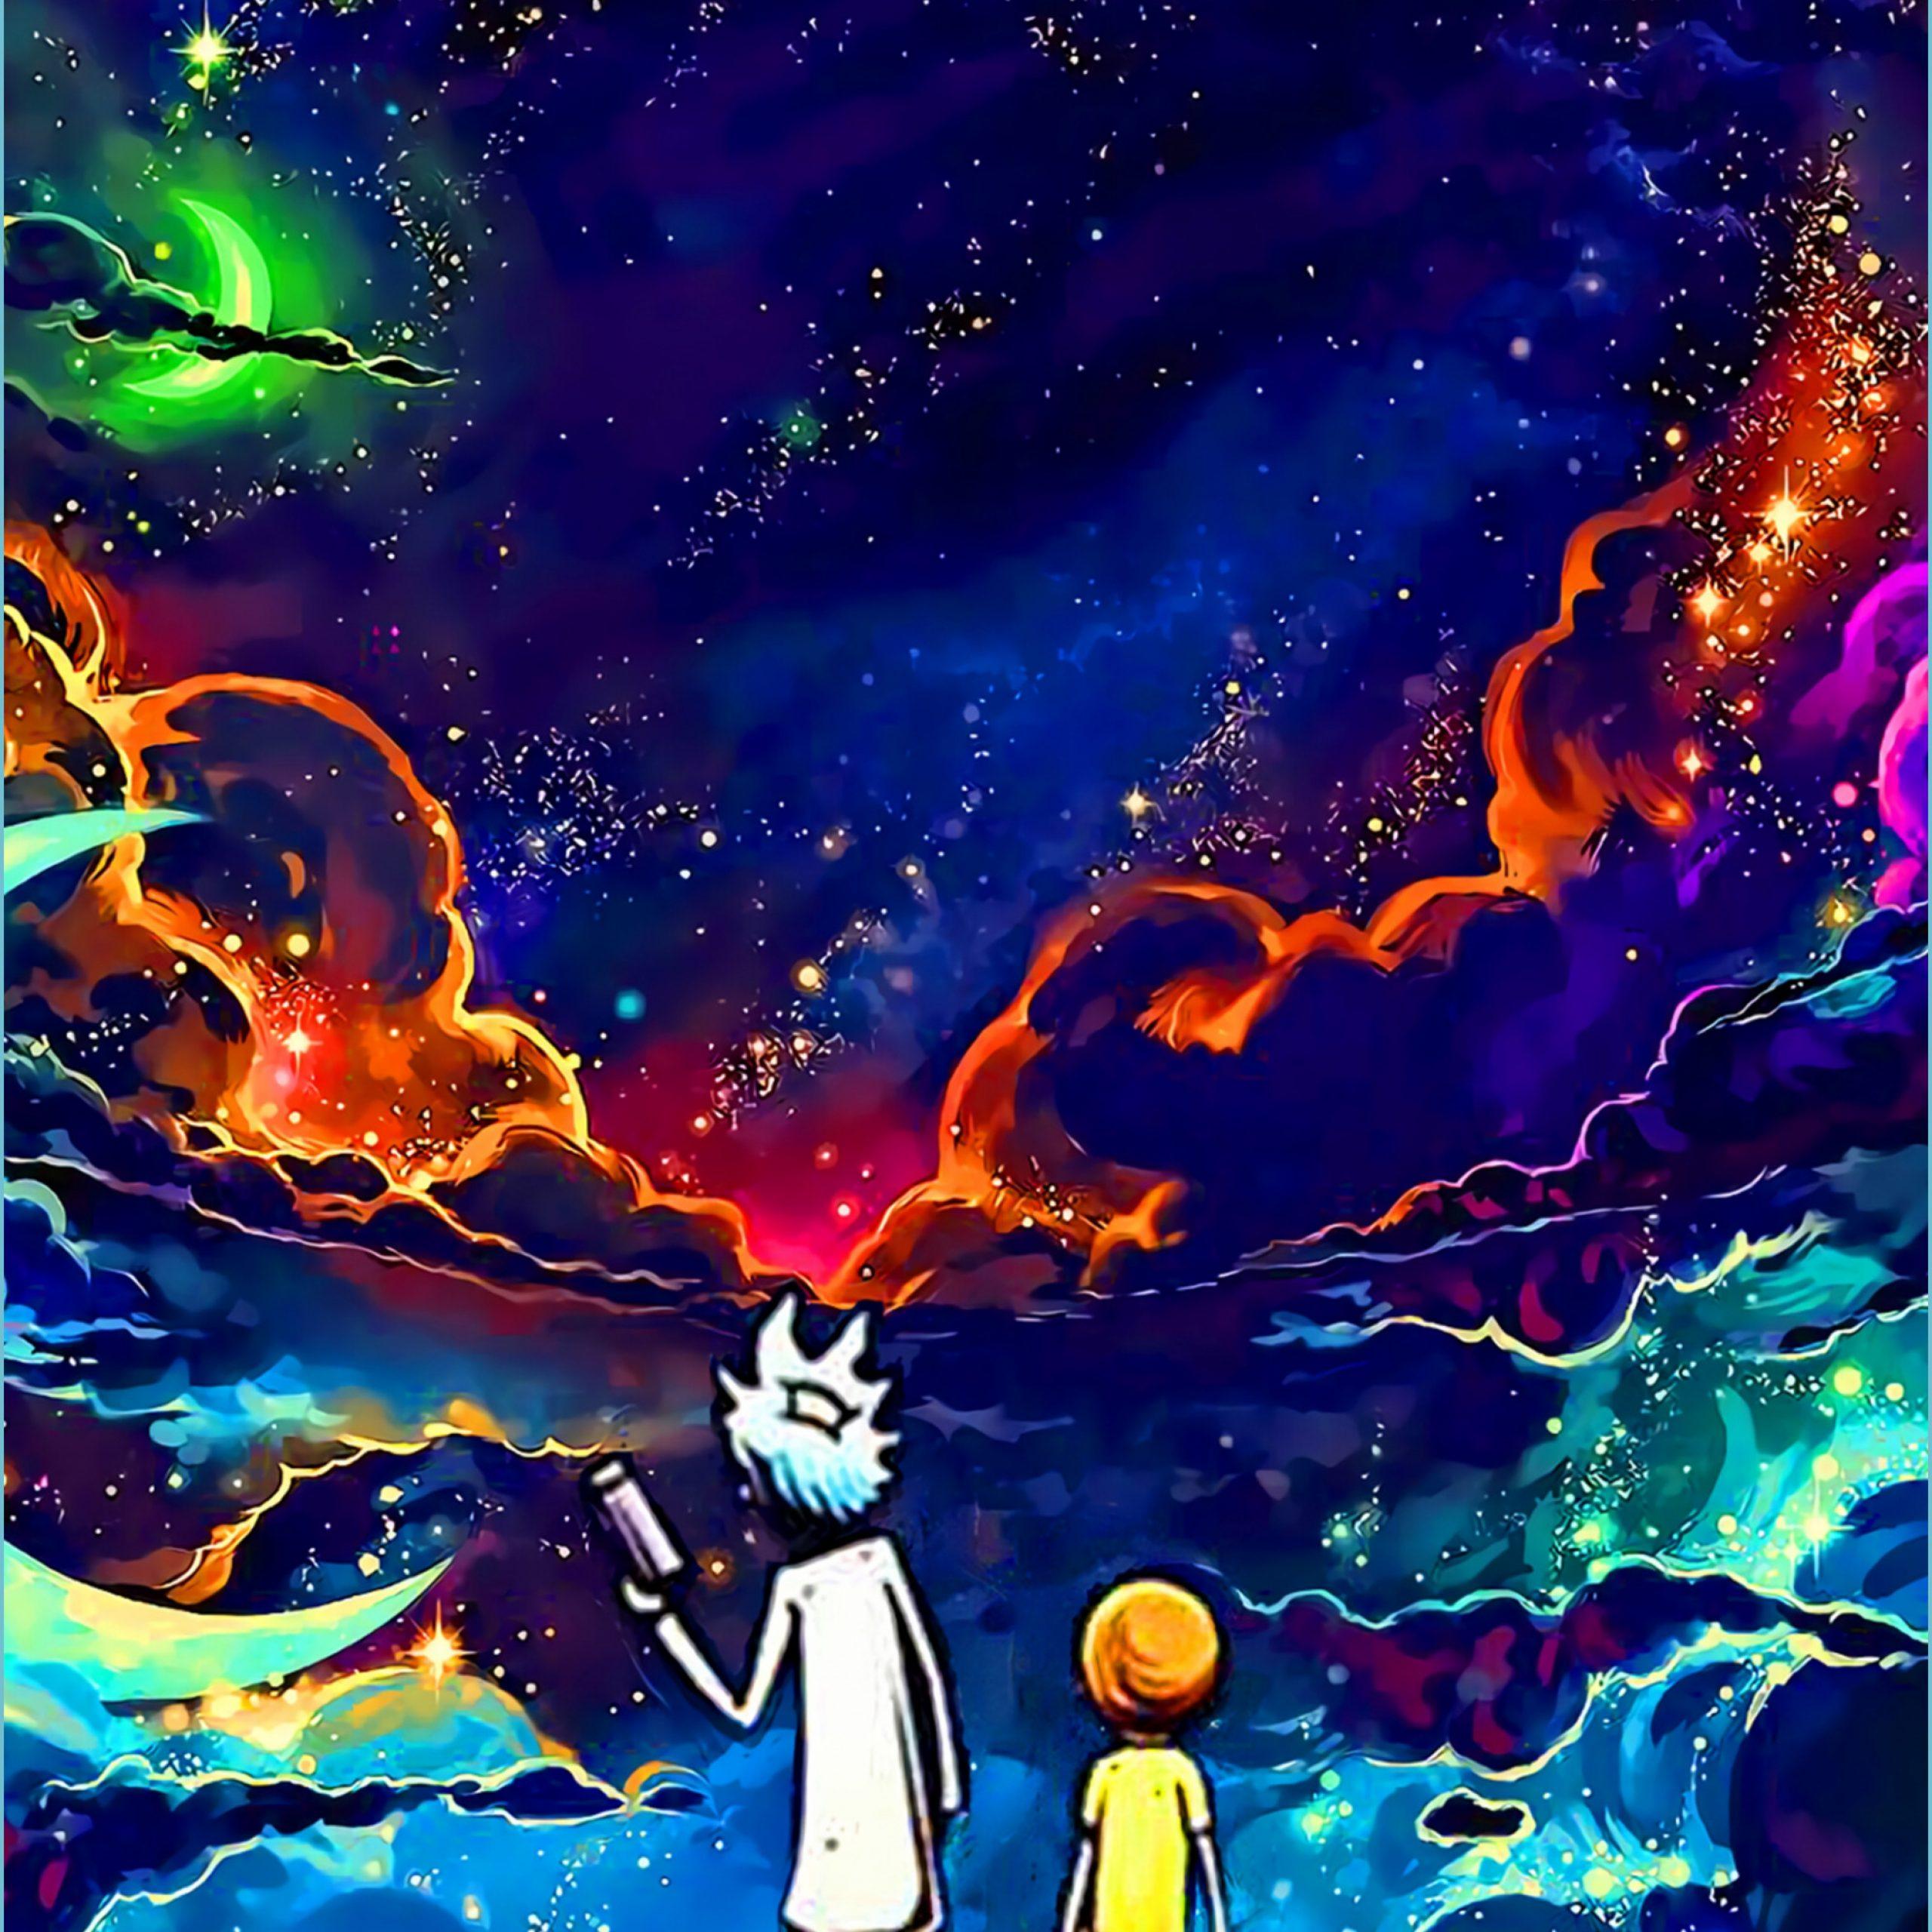 Rick and Jesse, breaking bad, rick and morty, HD phone wallpaper